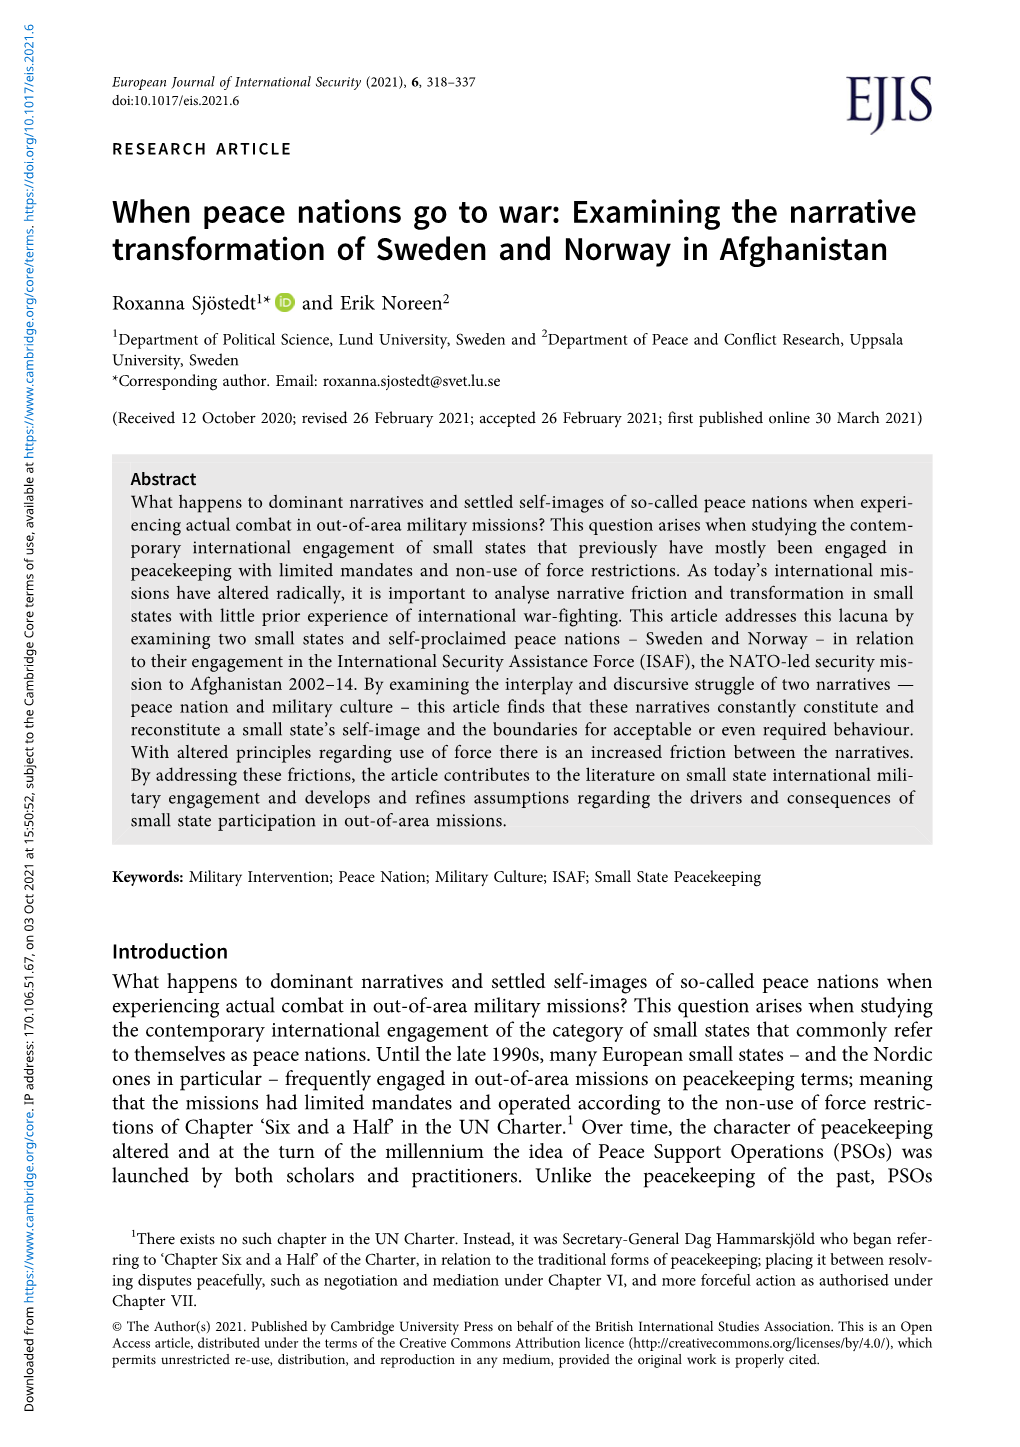 When Peace Nations Go to War: Examining the Narrative Transformation of Sweden and Norway in Afghanistan